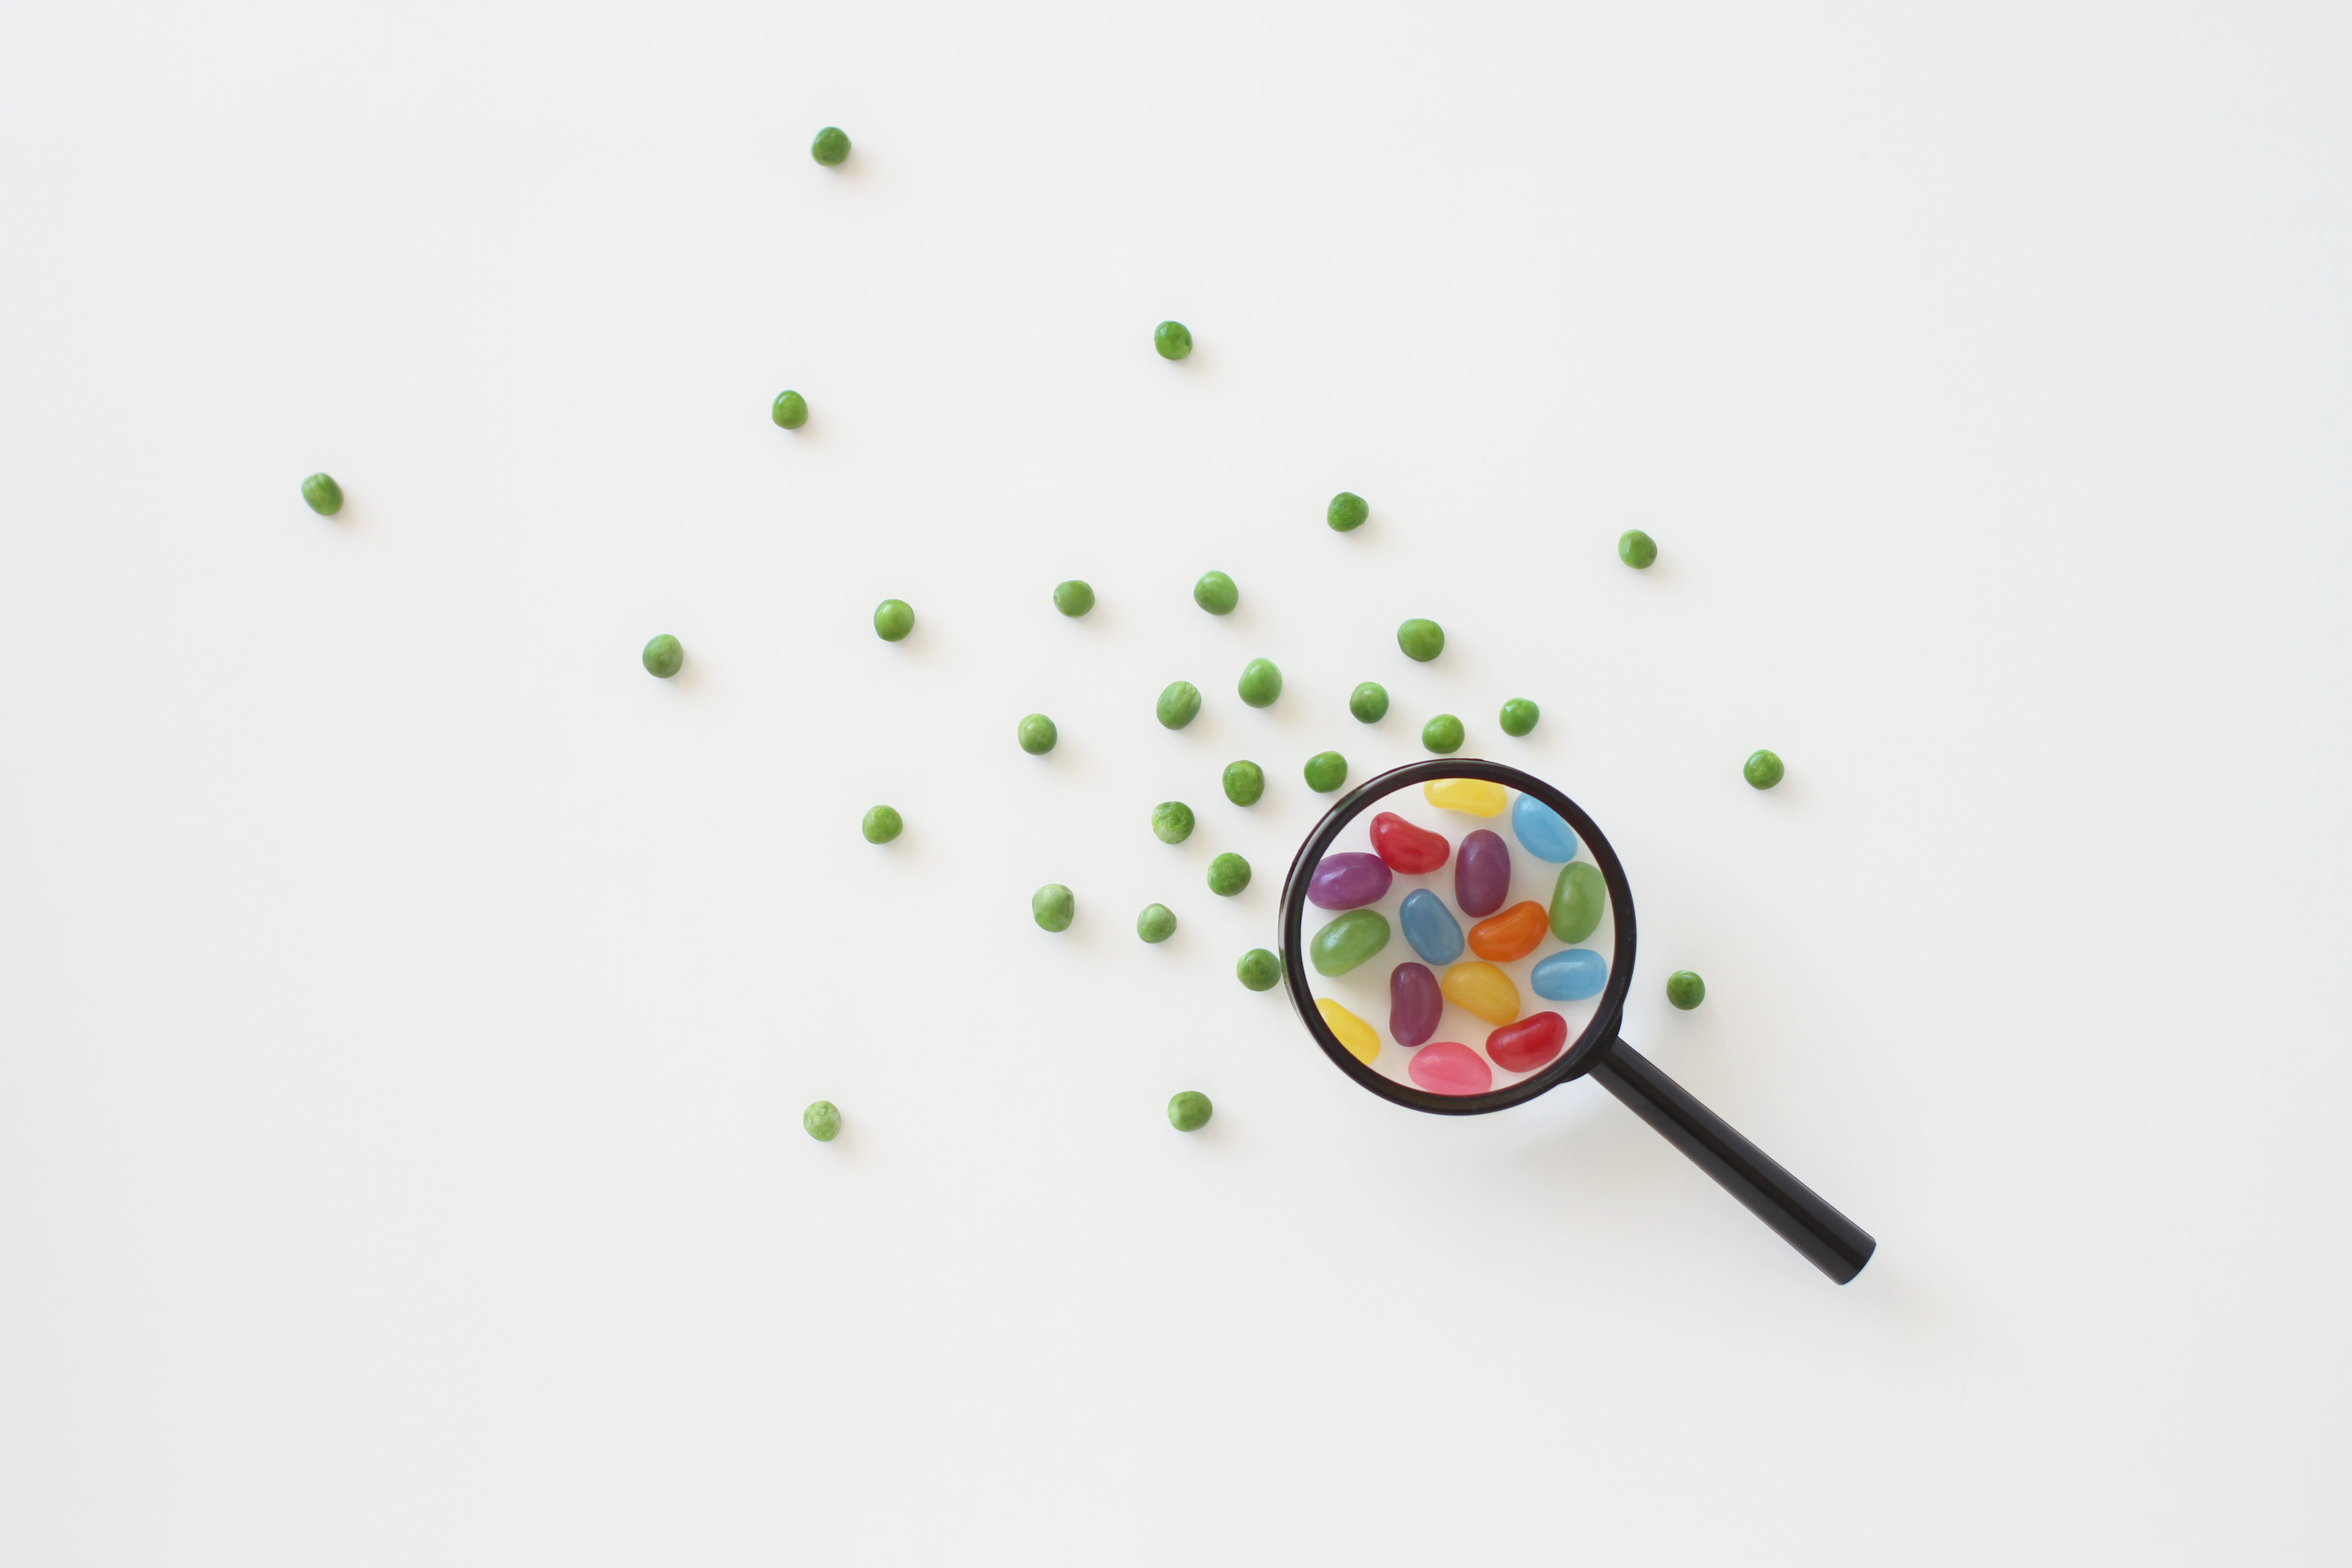 Image of jelly beans under a magnifying glass surrounded by peas to show regulatory oversight.